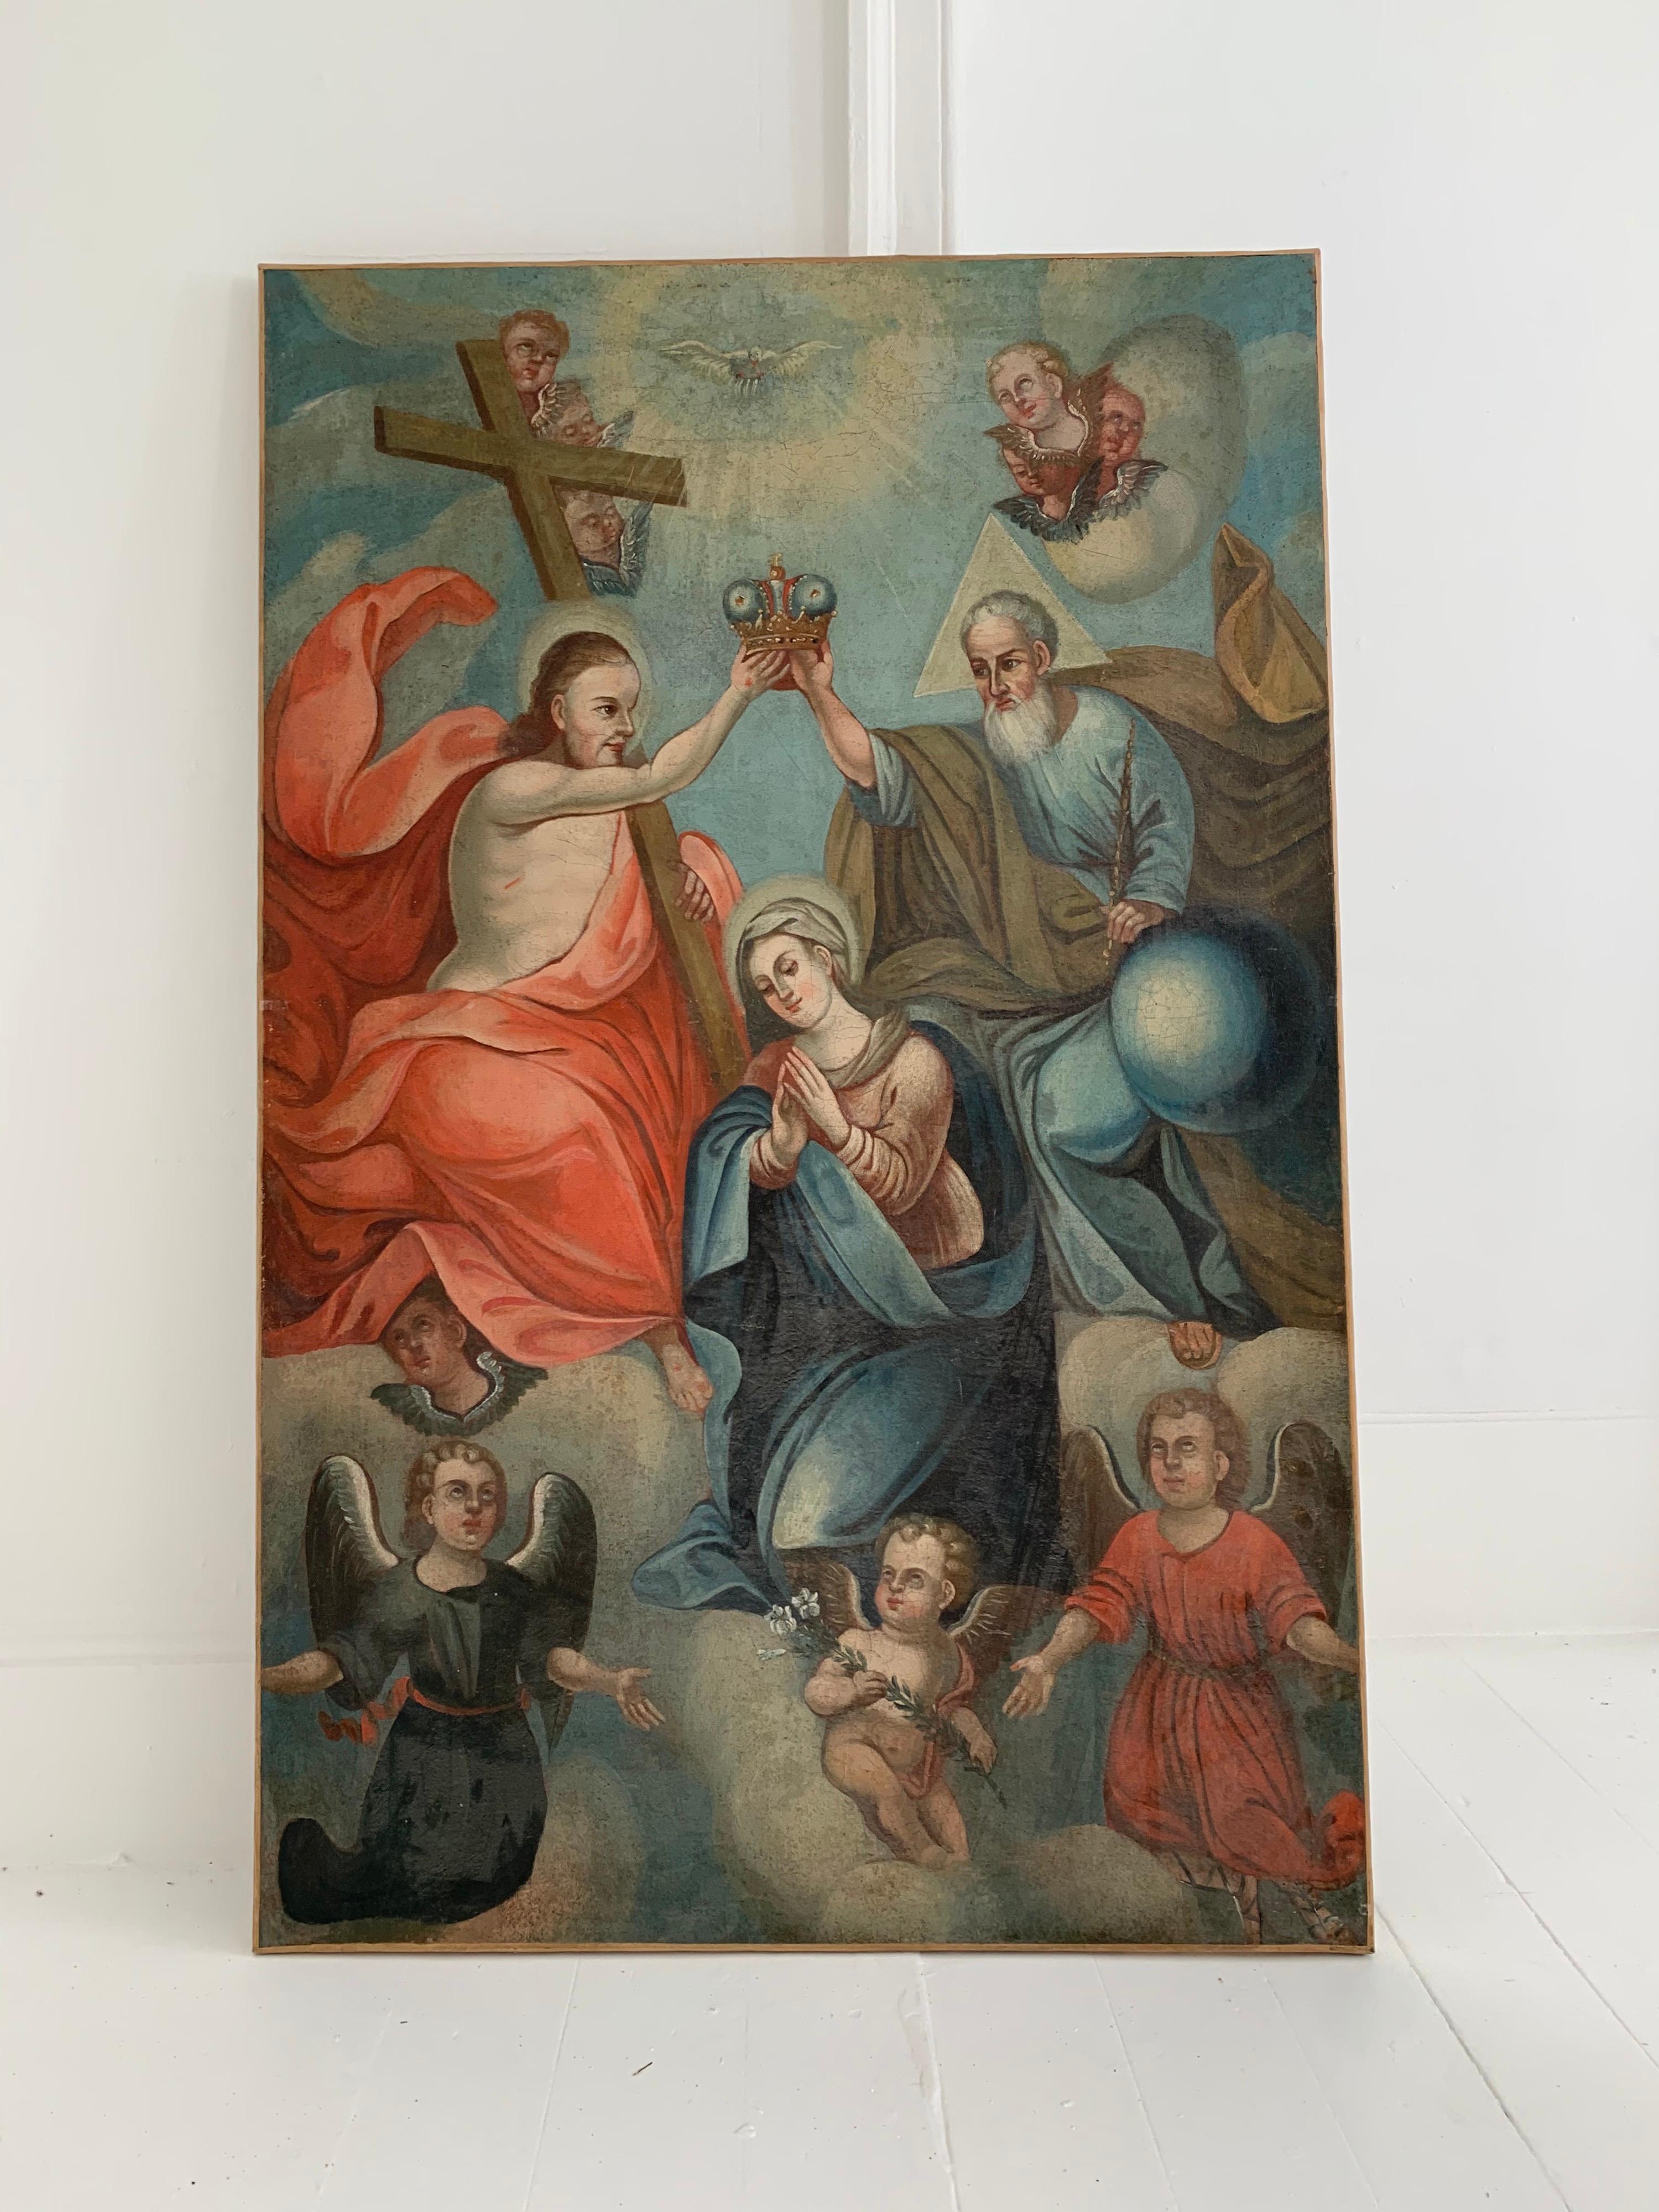 ENORMOUS 18th CENTURY SPANISH OLD MASTER OIL PAINTING - ASSUMPTION OF THE VIRGIN - Painting by Spanish Old Master